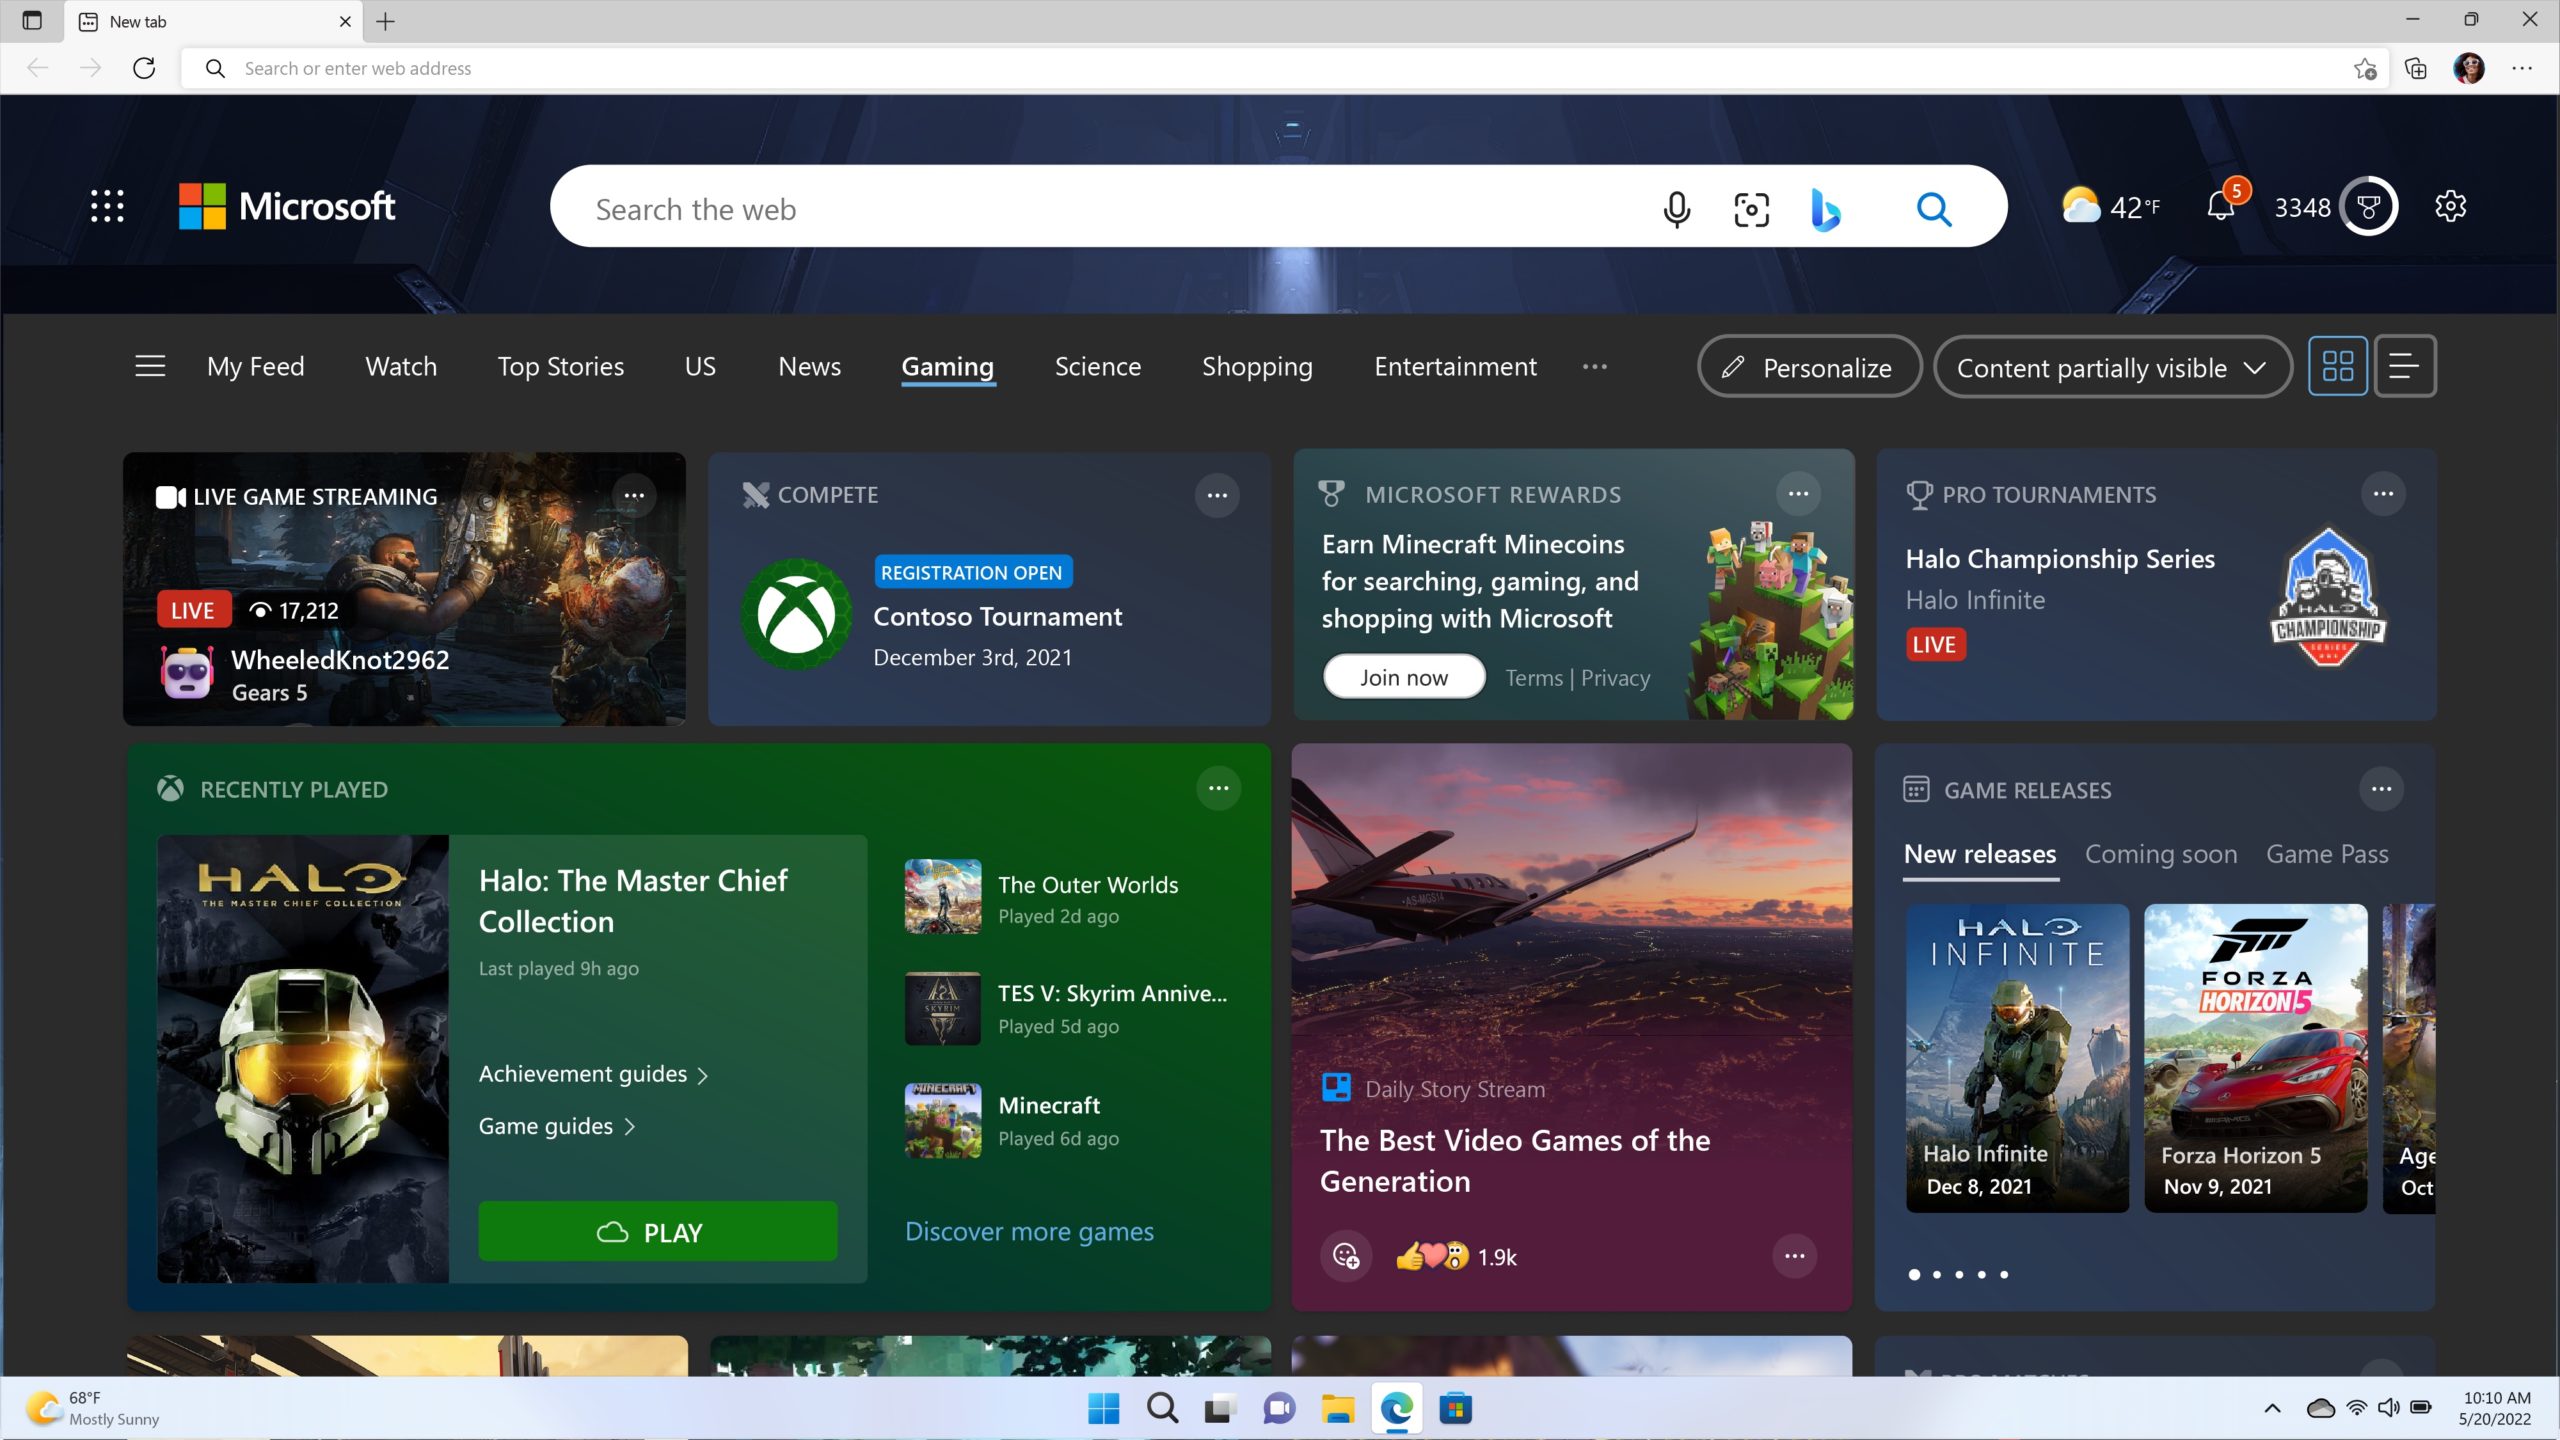 Microsoft Edge will get new gaming features from Xbox